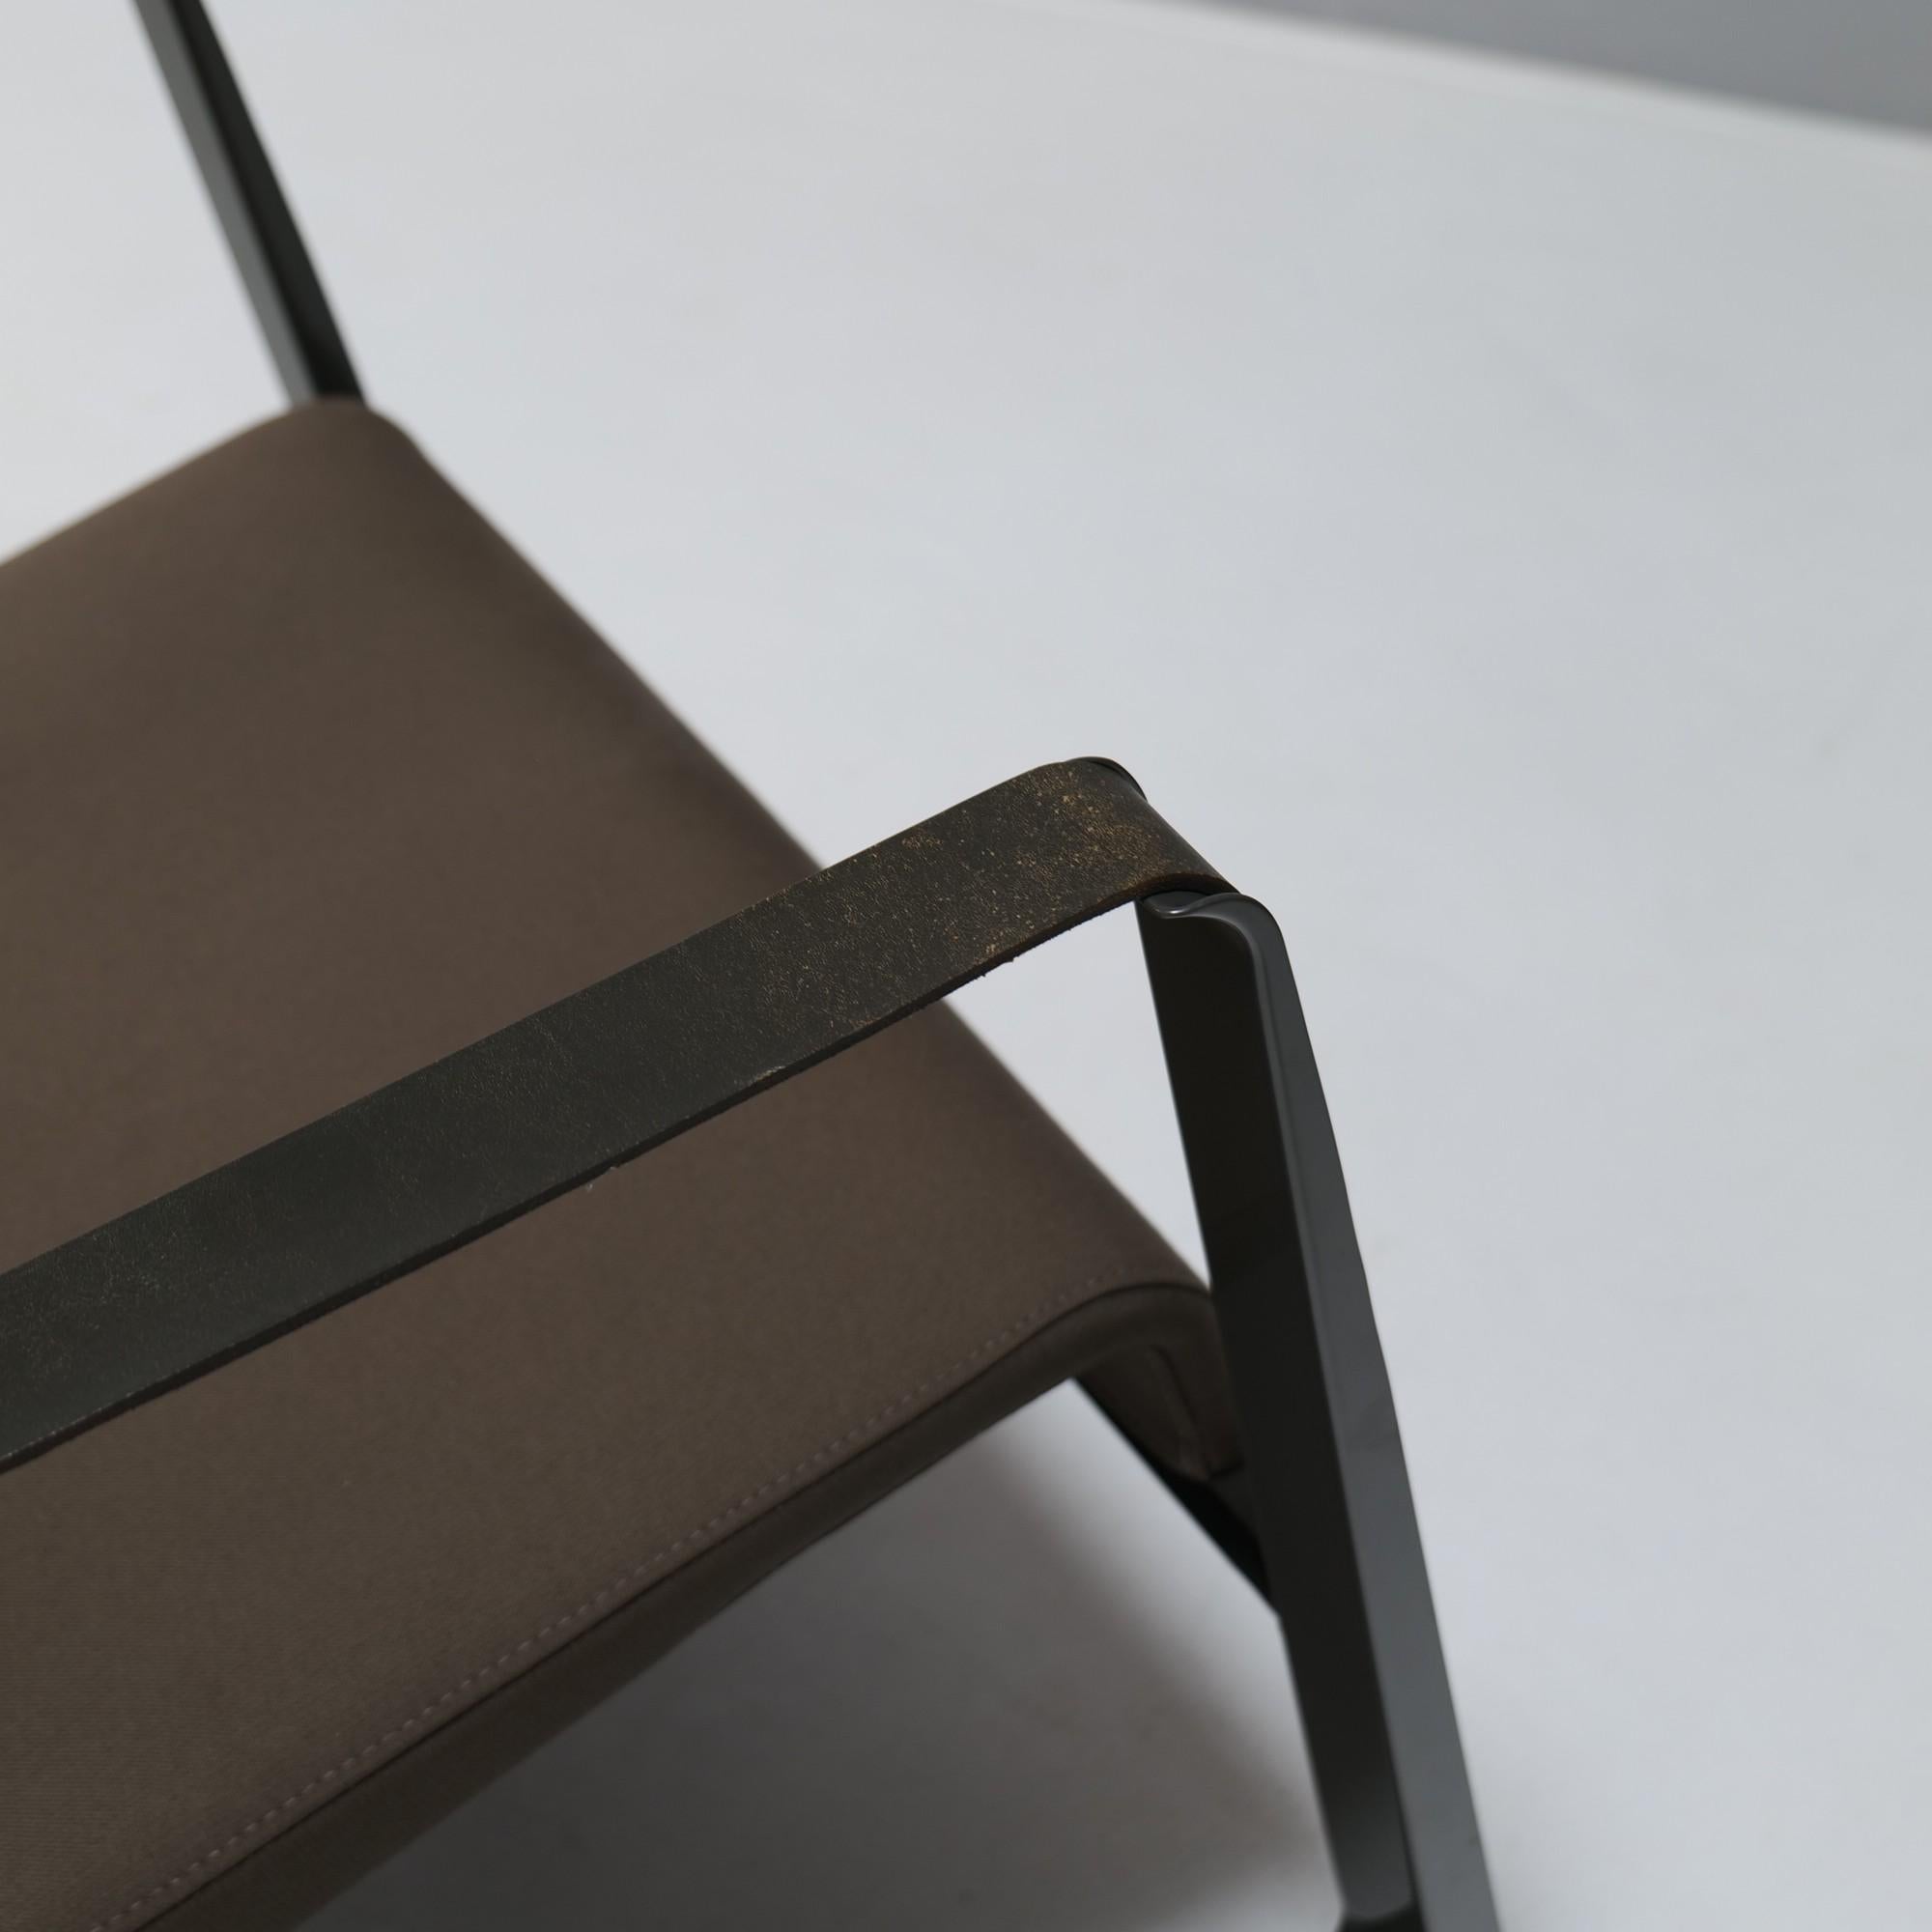 Mid-20th Century Limited edition Cité armchair by Jean Prouvé for Vitra x G-Star Raw #50